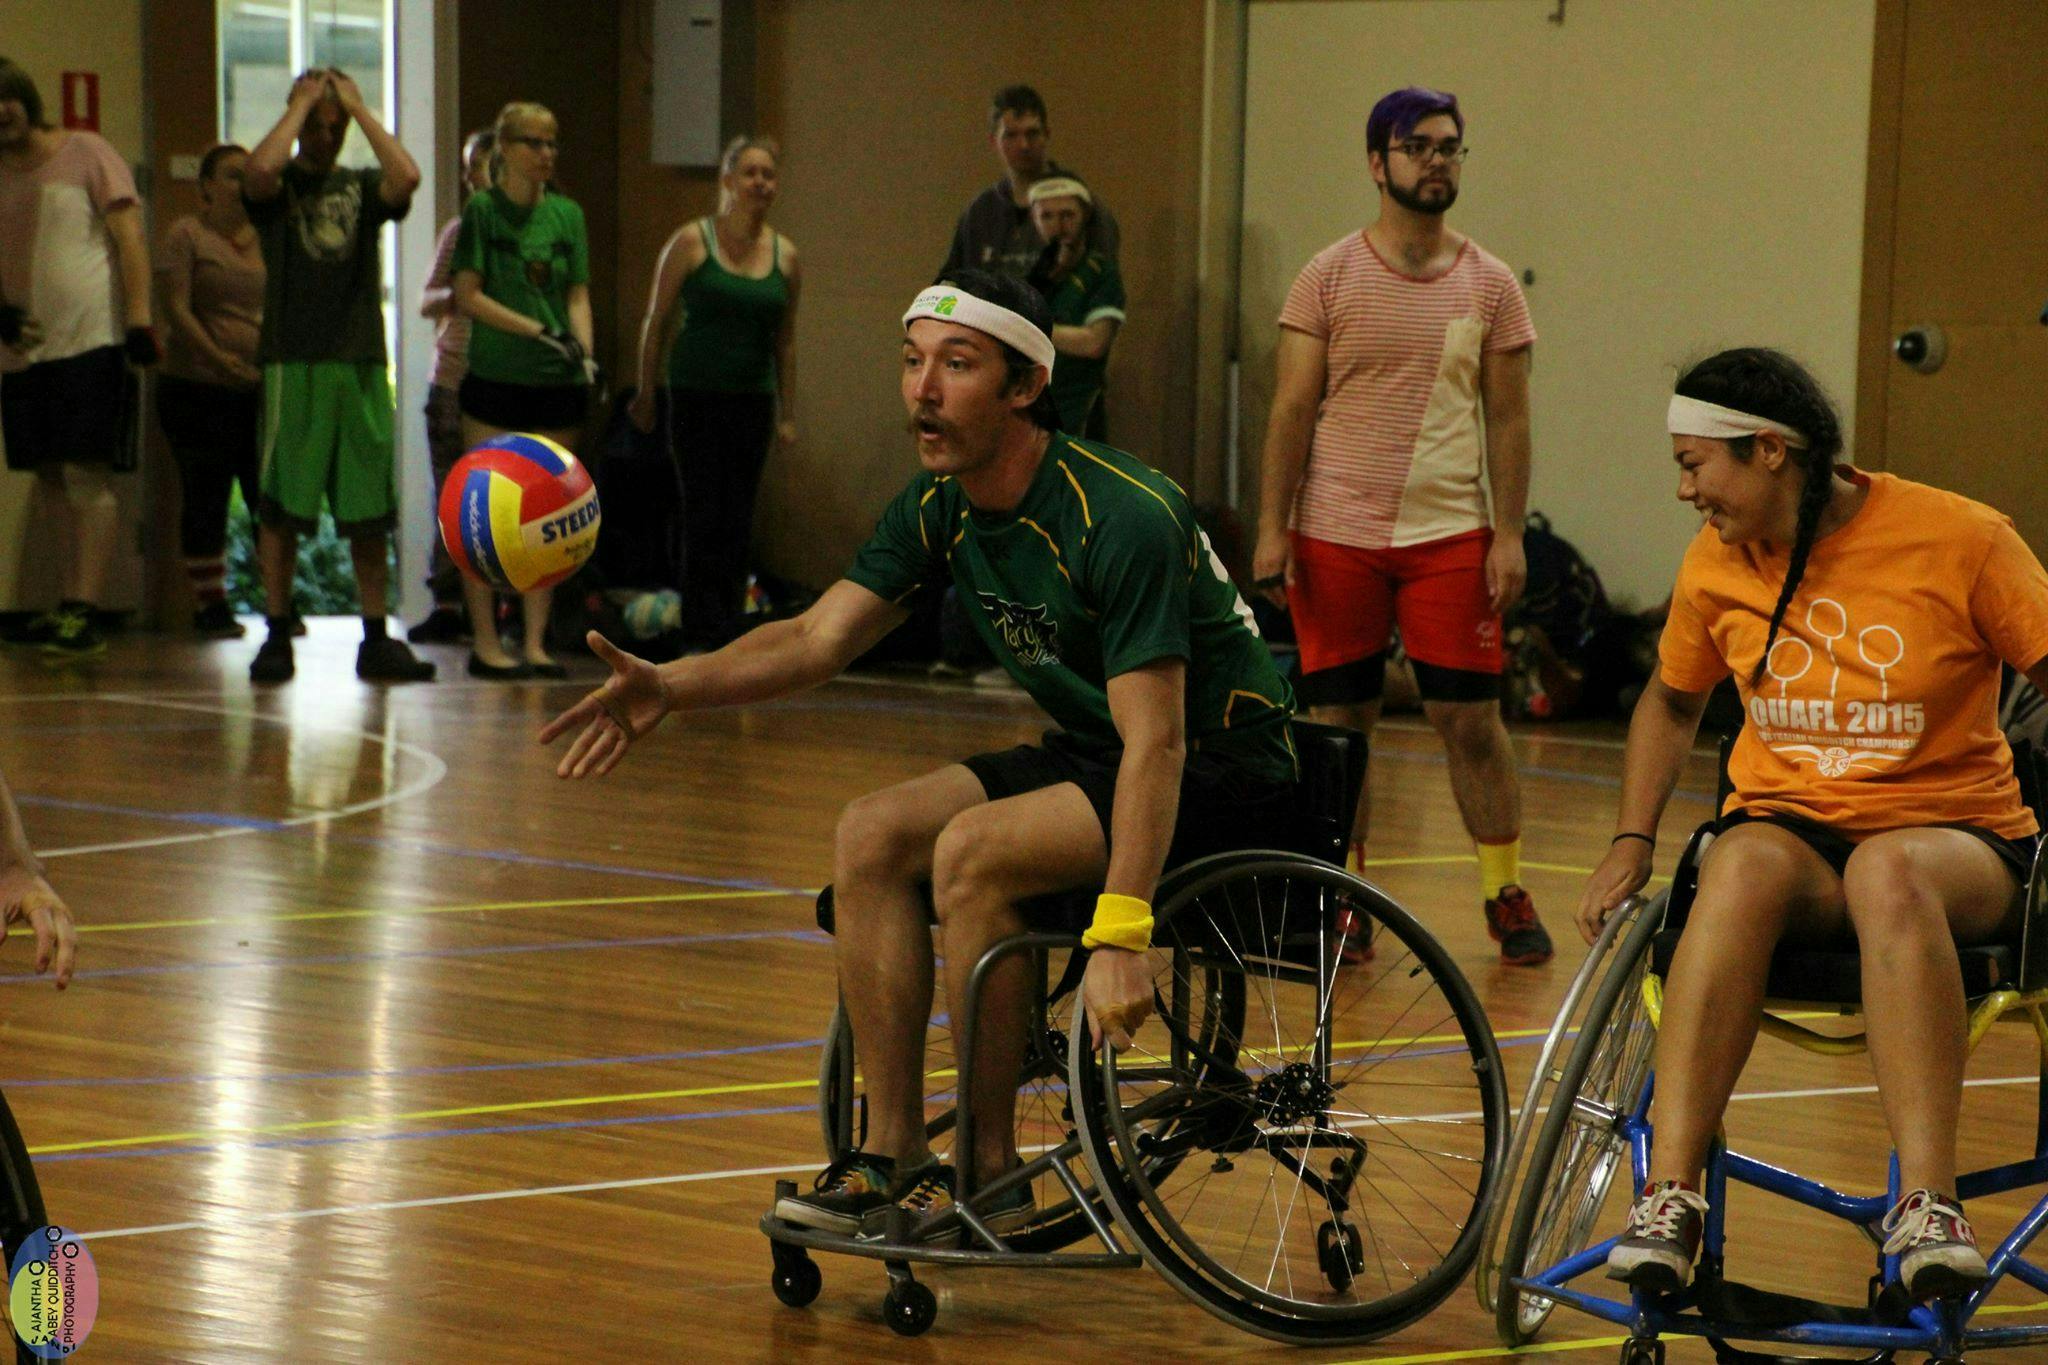 Player throws the ball while playing Wheelchair Quidditch